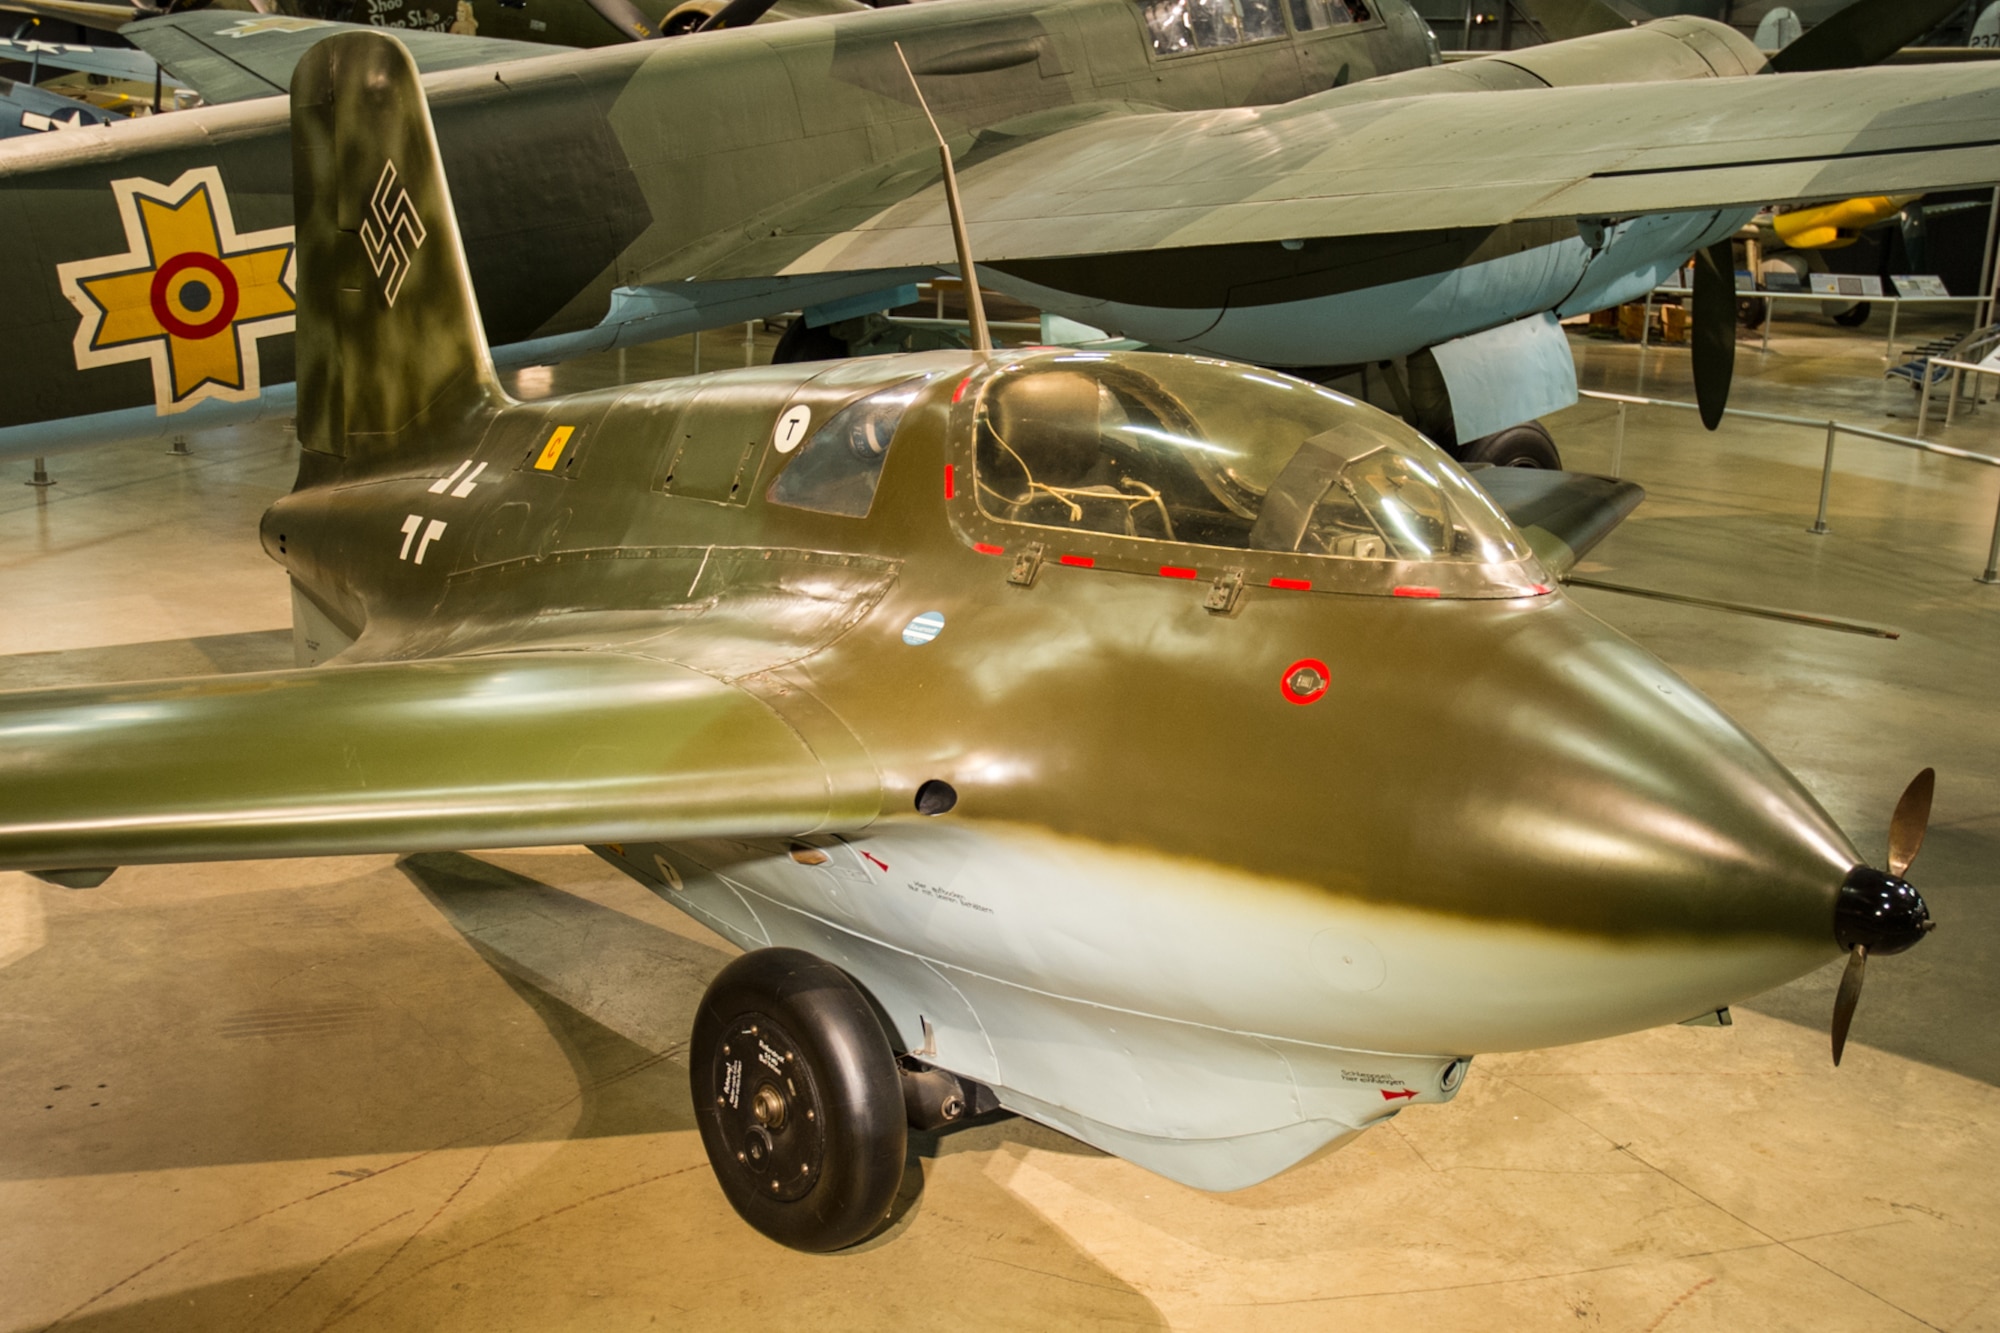 DAYTON, Ohio -- Messerschmitt Me 163B in the World War II Gallery at the National Museum of the United States Air Force. (U.S. Air Force photo)